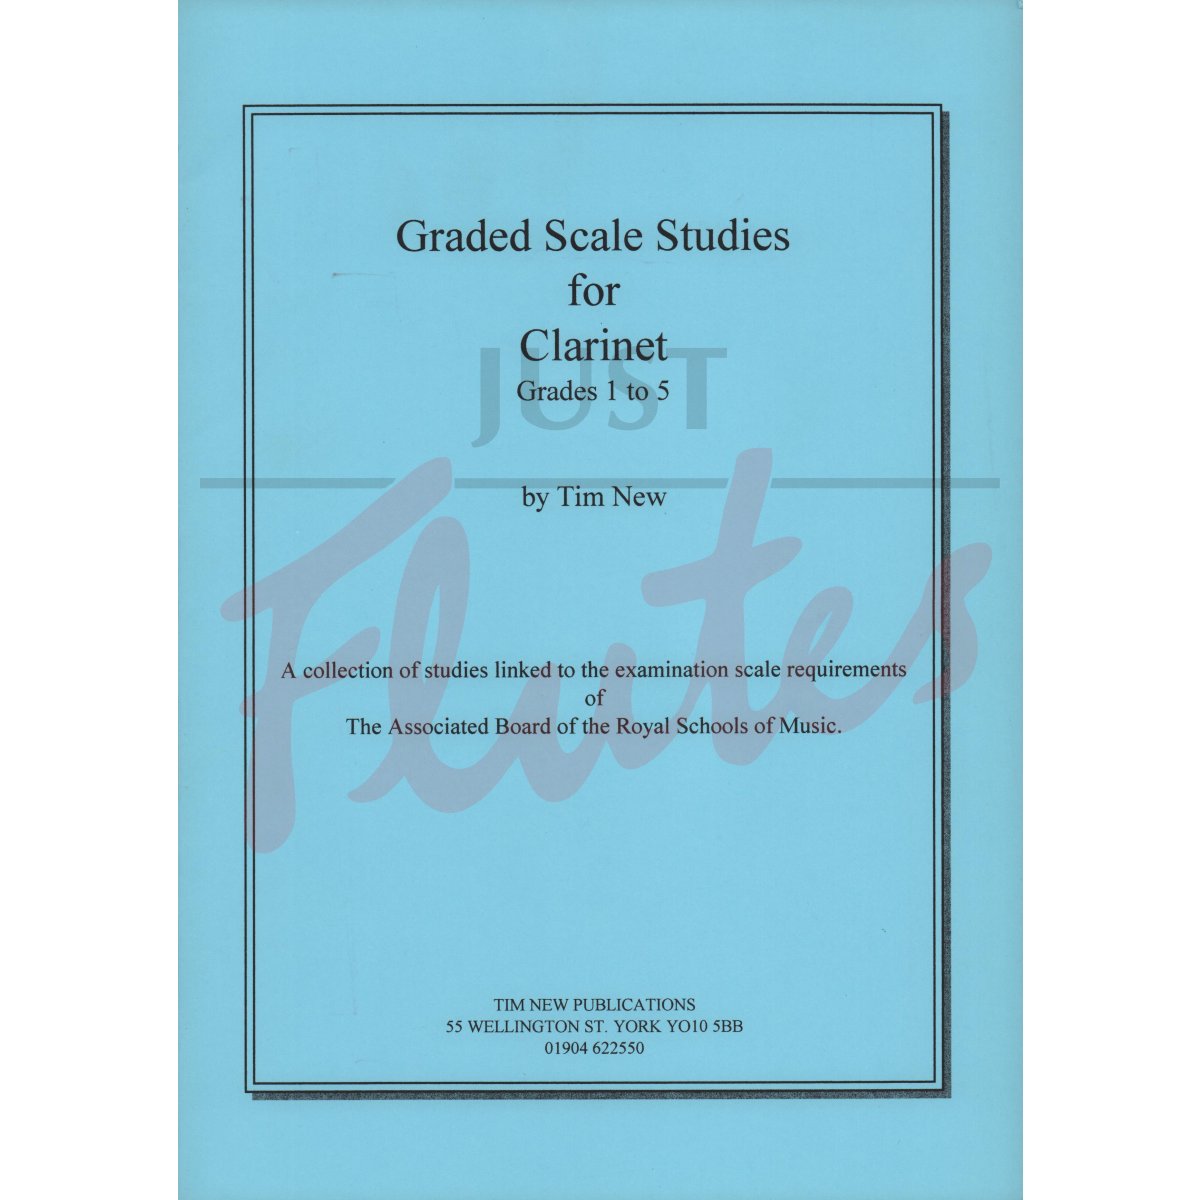 Graded Scale Studies for Clarinet Grades 1-5